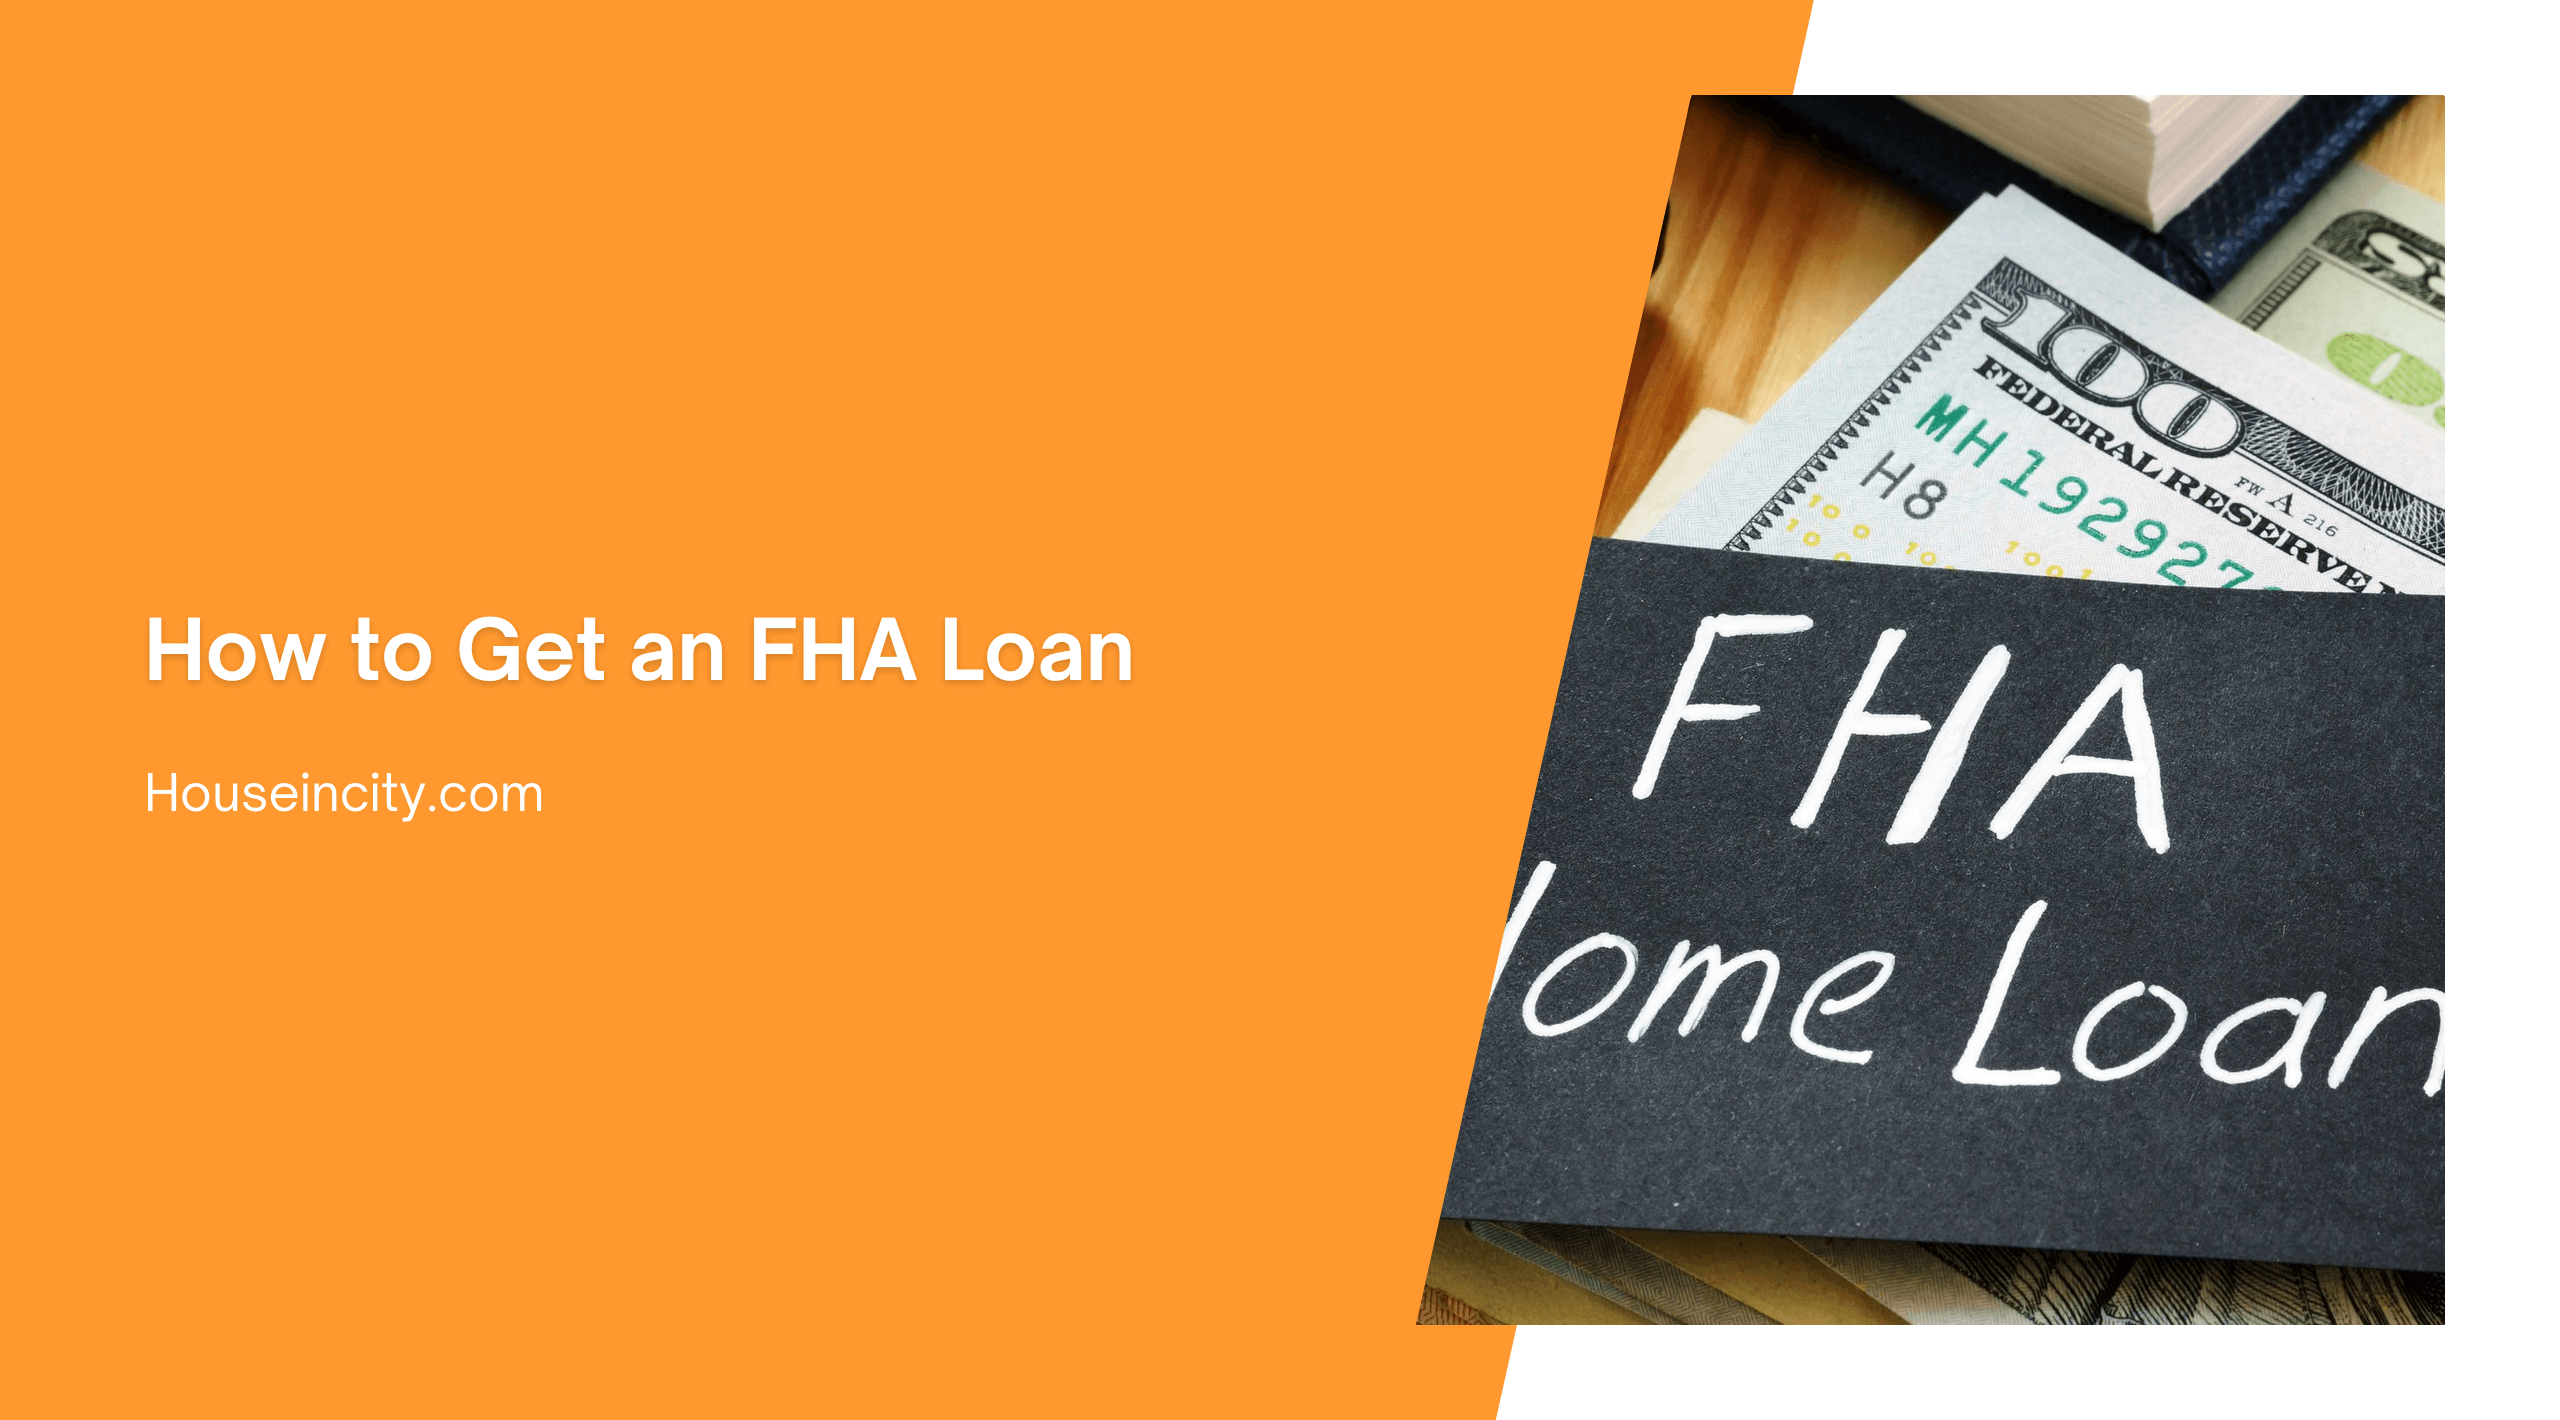 How to Get an FHA Loan